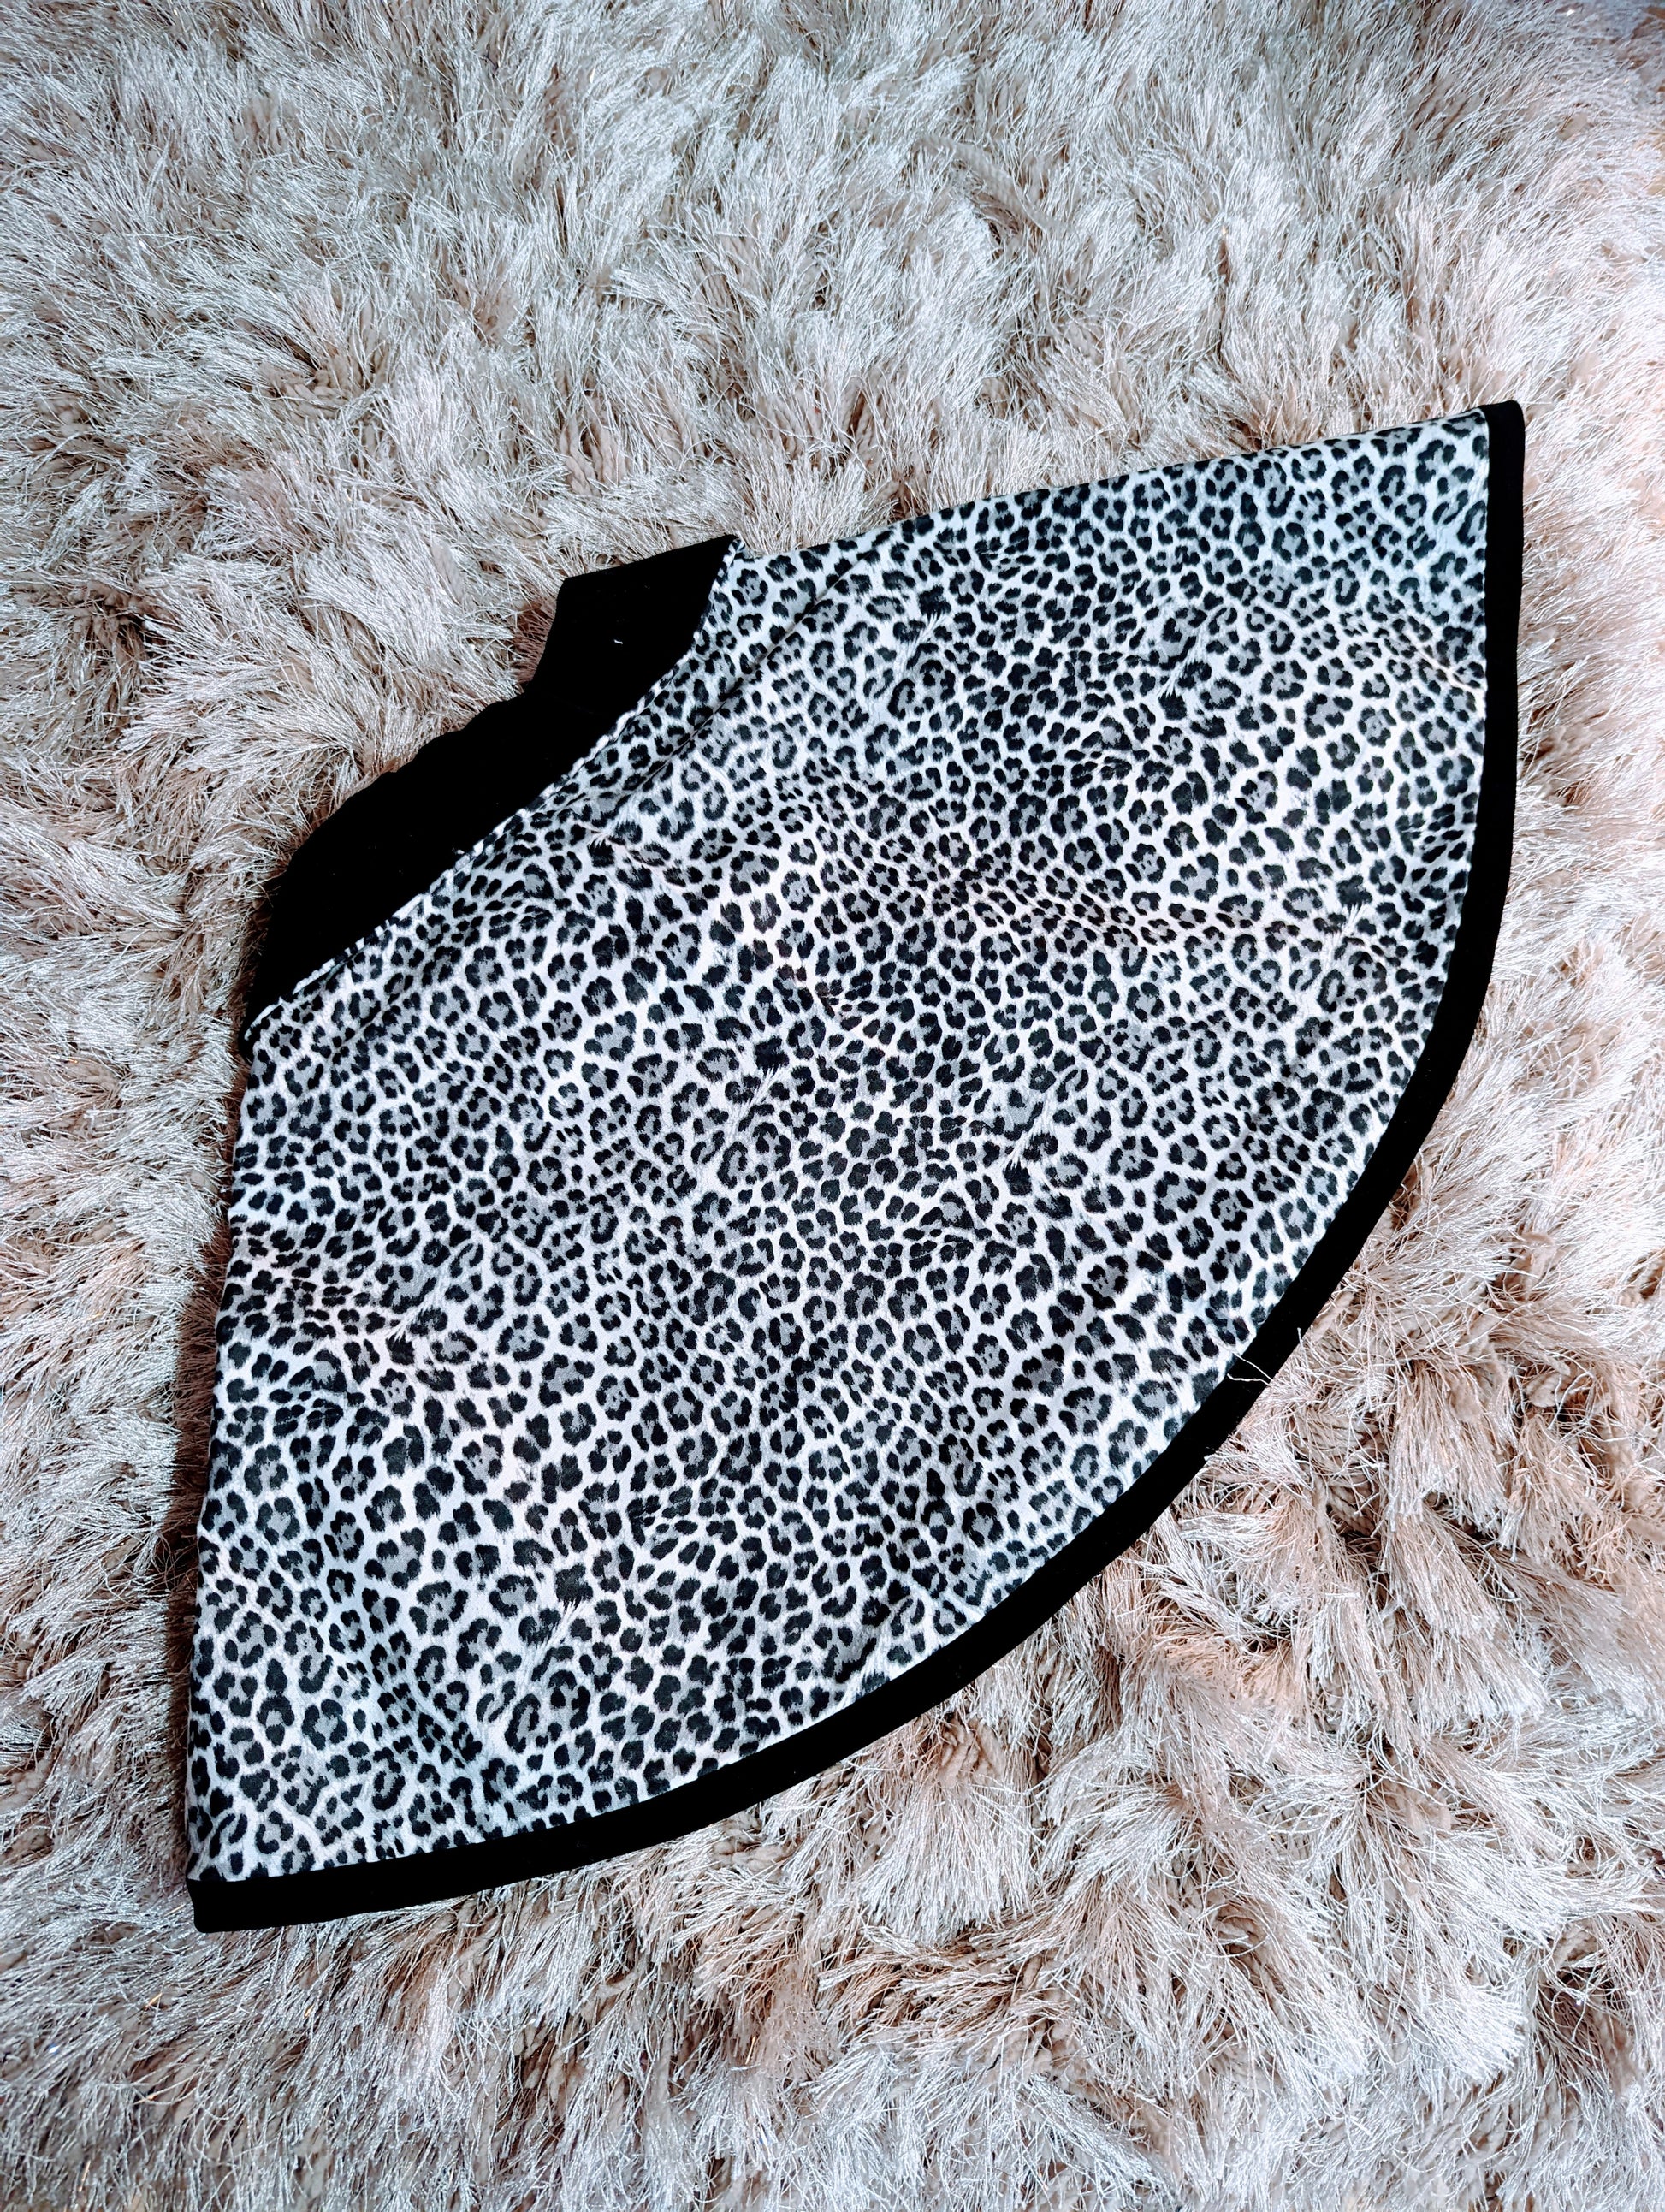 Snow Leopard Print Capelet by Hollyville